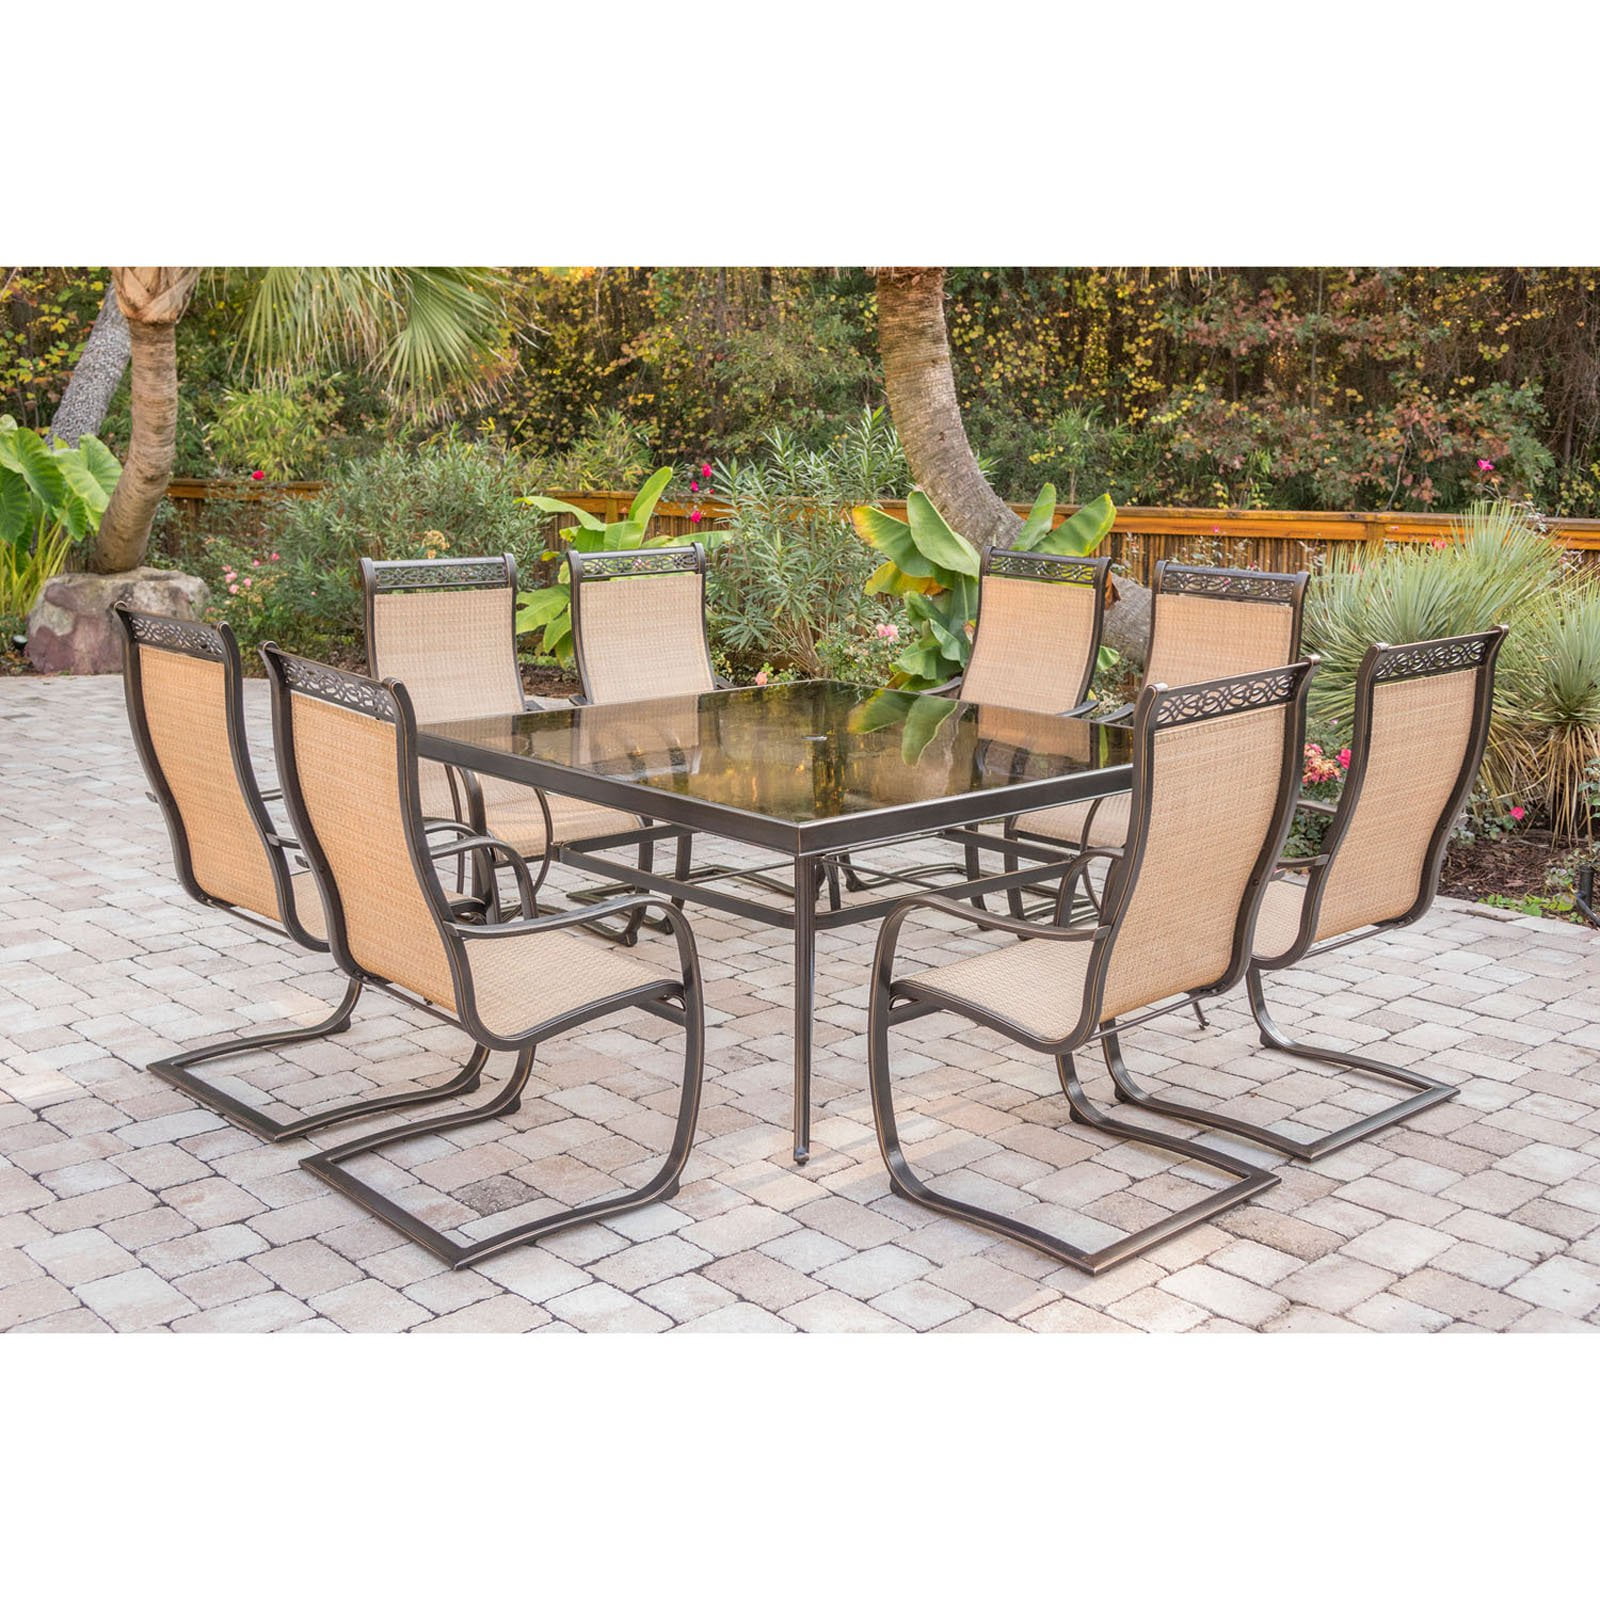 Outdoor Monaco 9 Piece Sling Dining Set, Outdoor Glass Top Table And Chair Sets